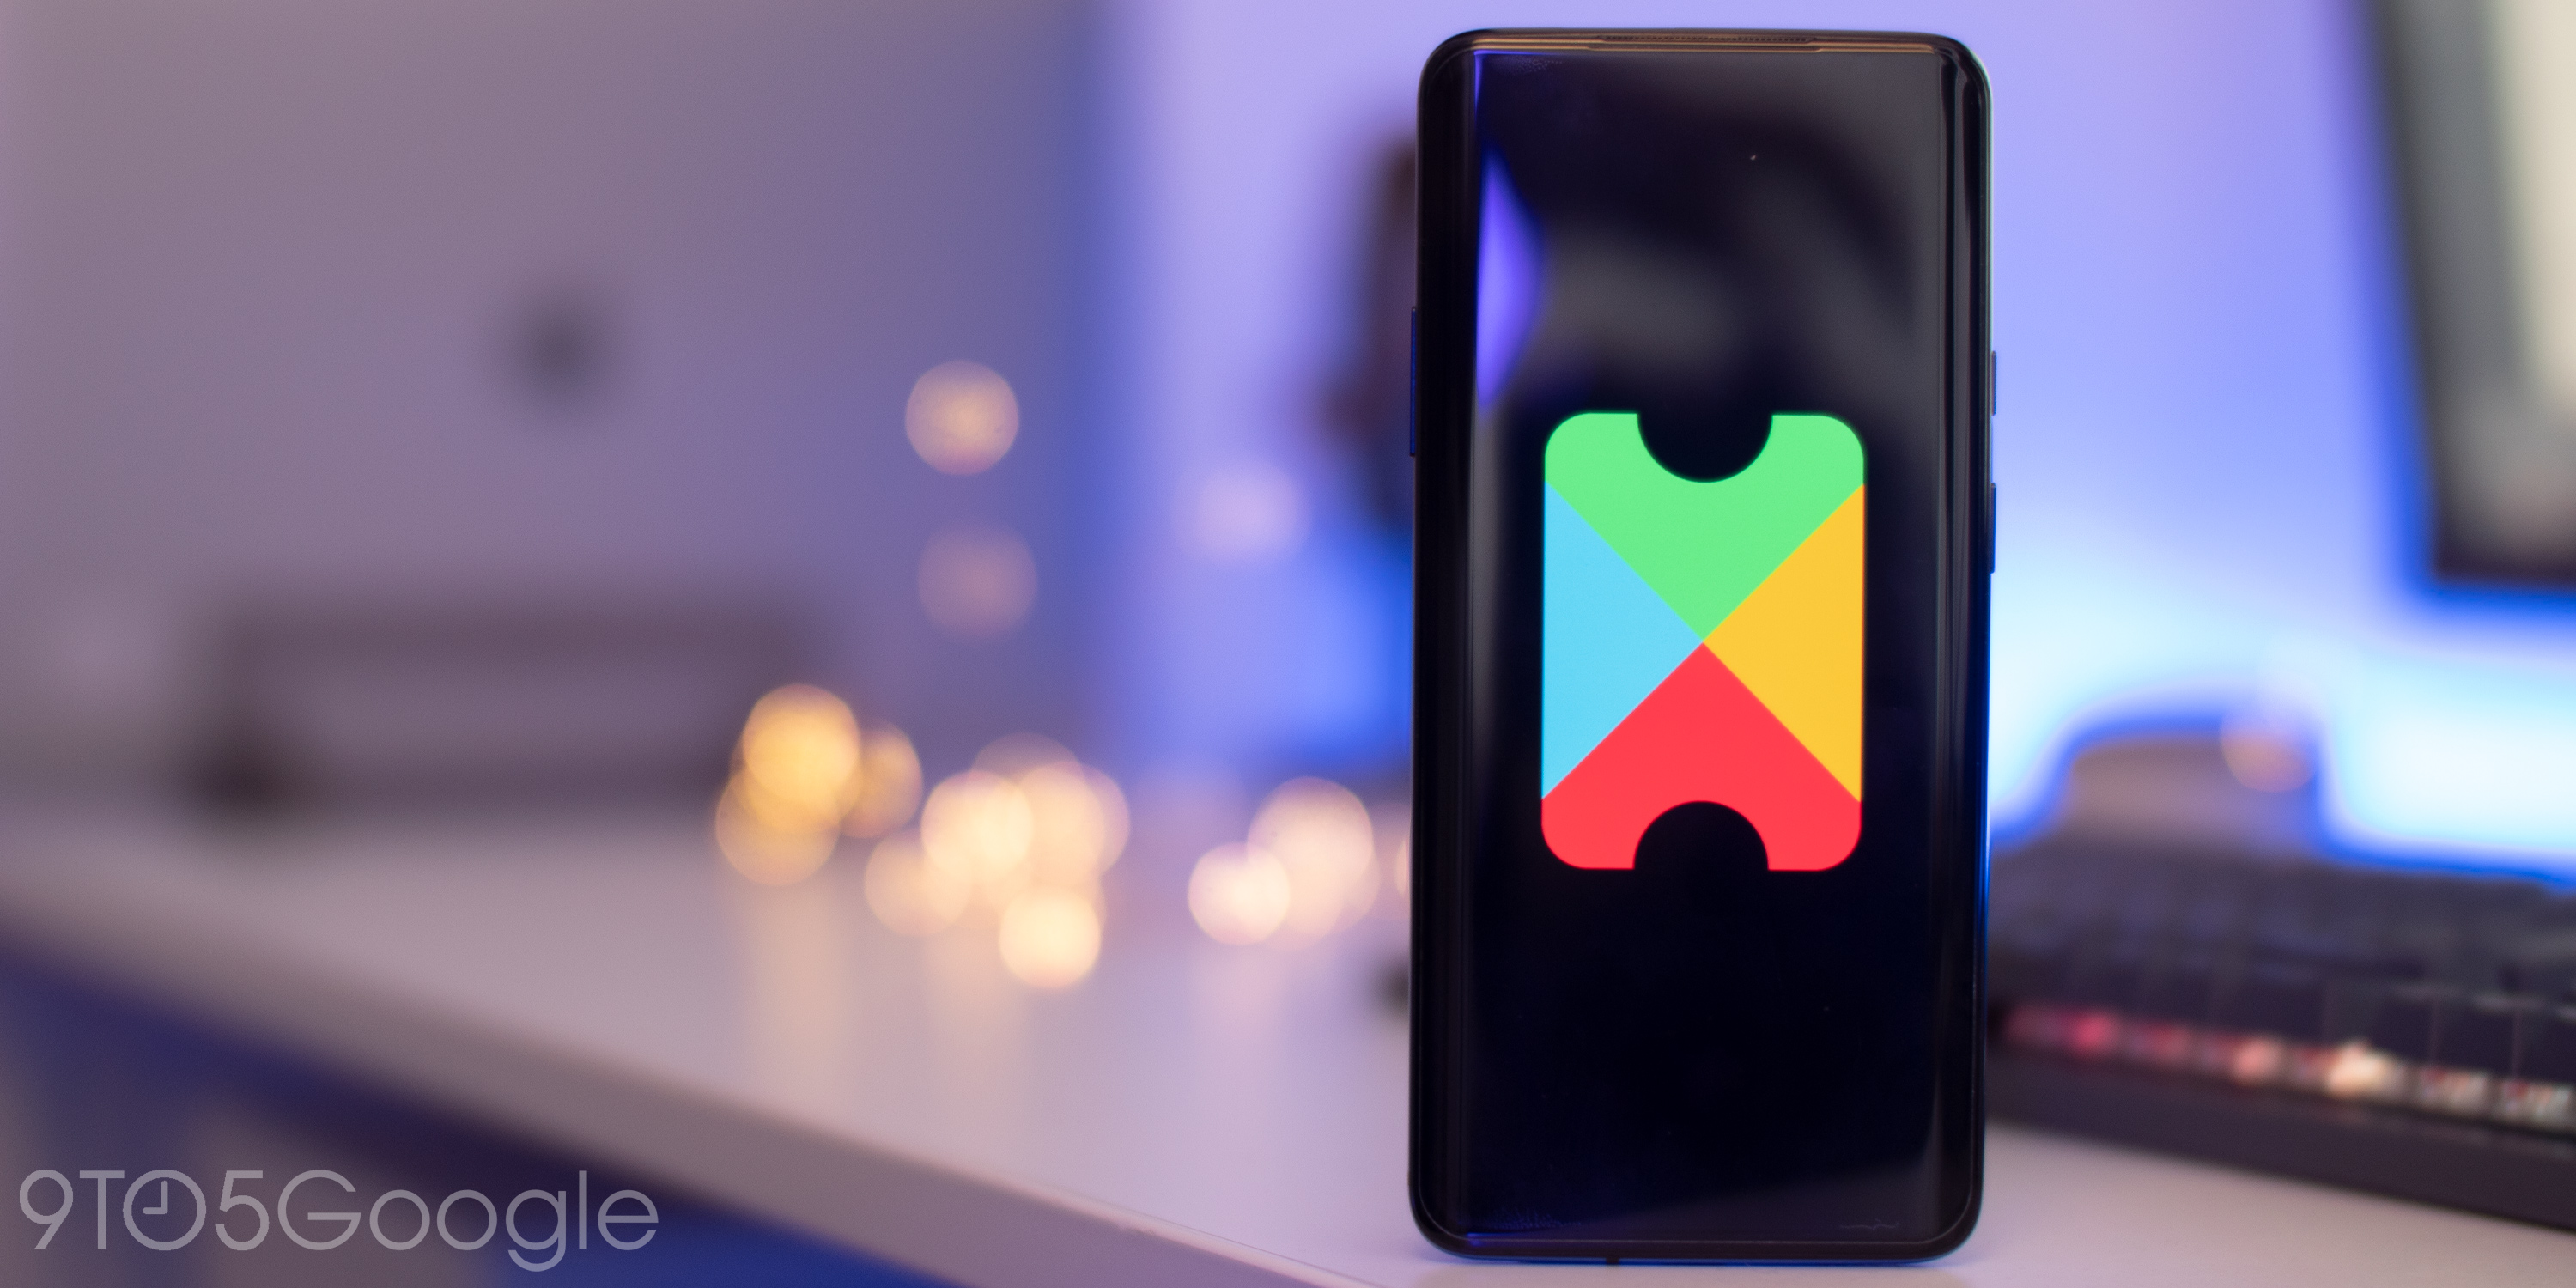 Google to Launch Google Play Pass' later this week that Offers